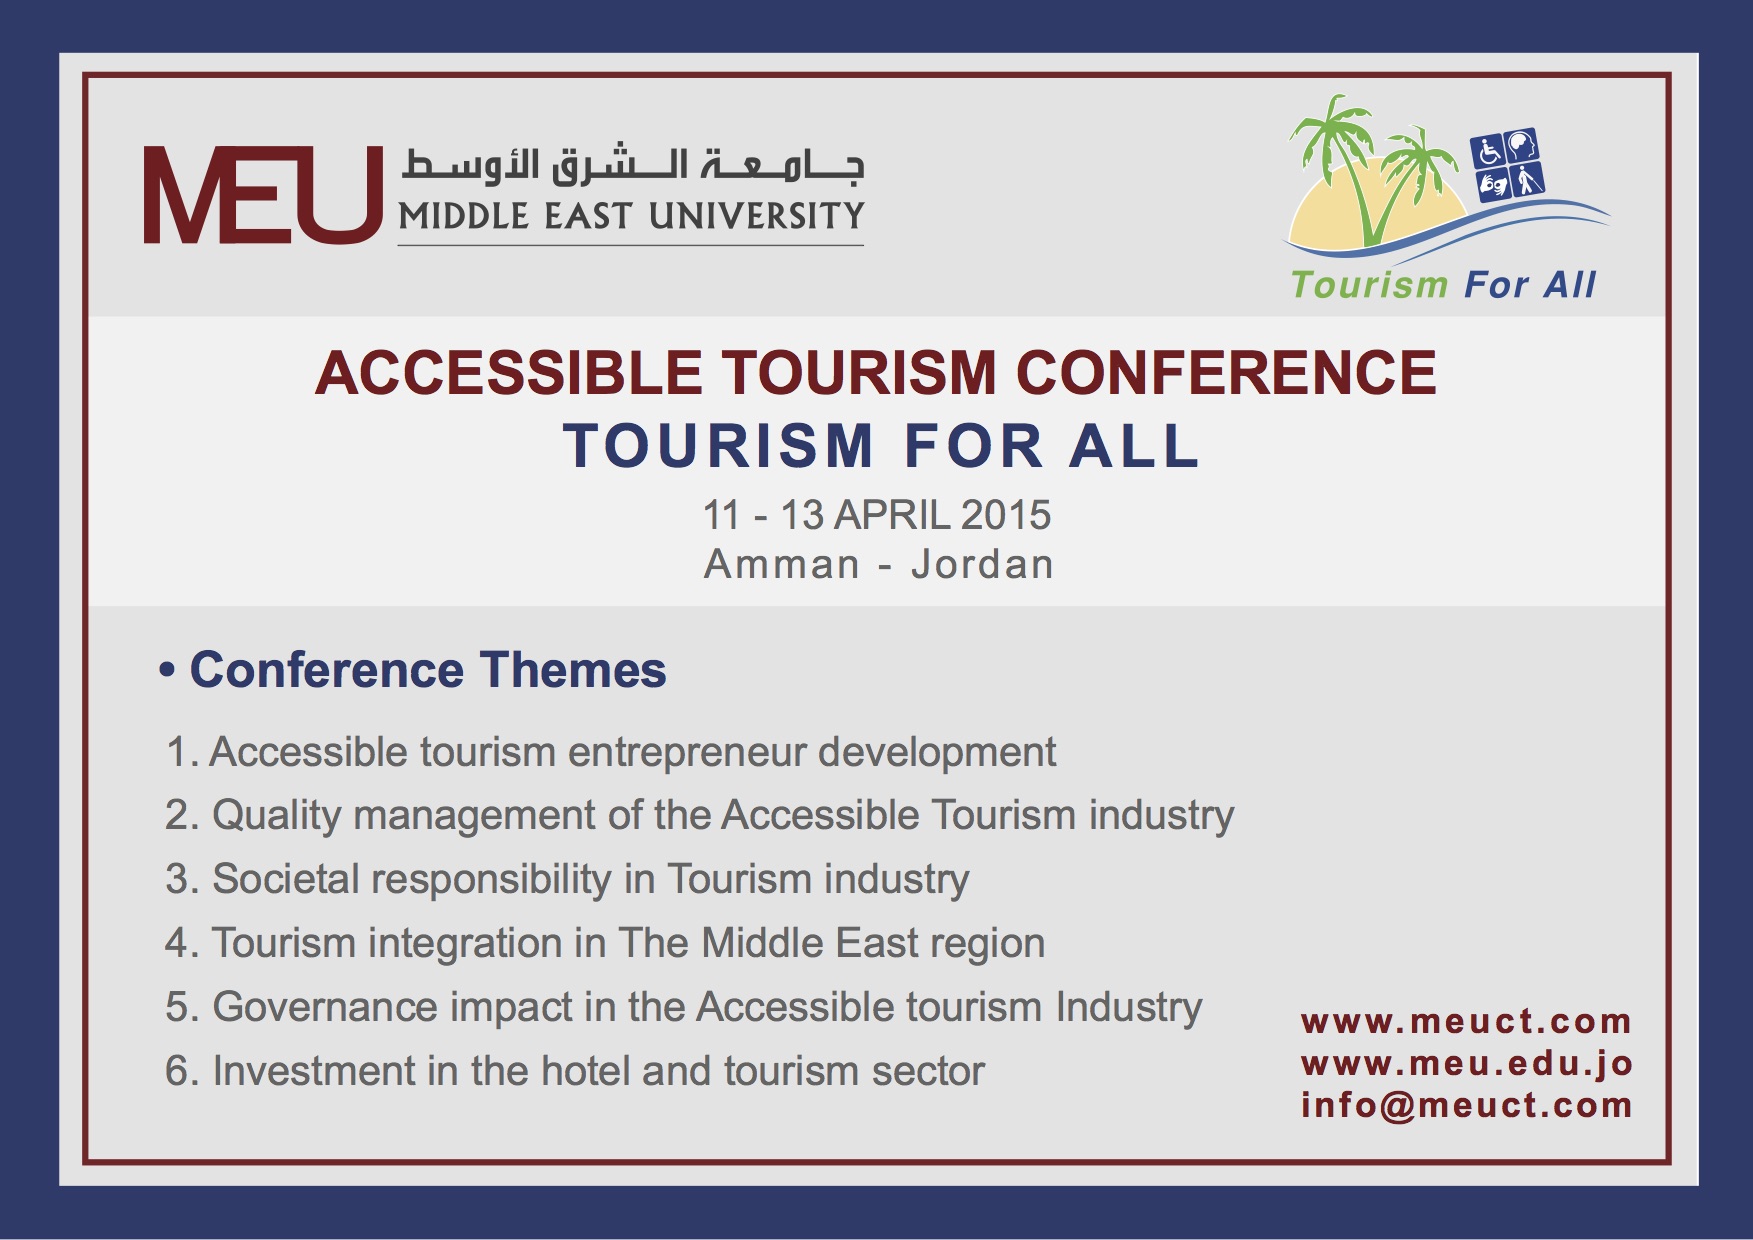 MEU Tourism for All conference themes banner (6 points, as listed above)